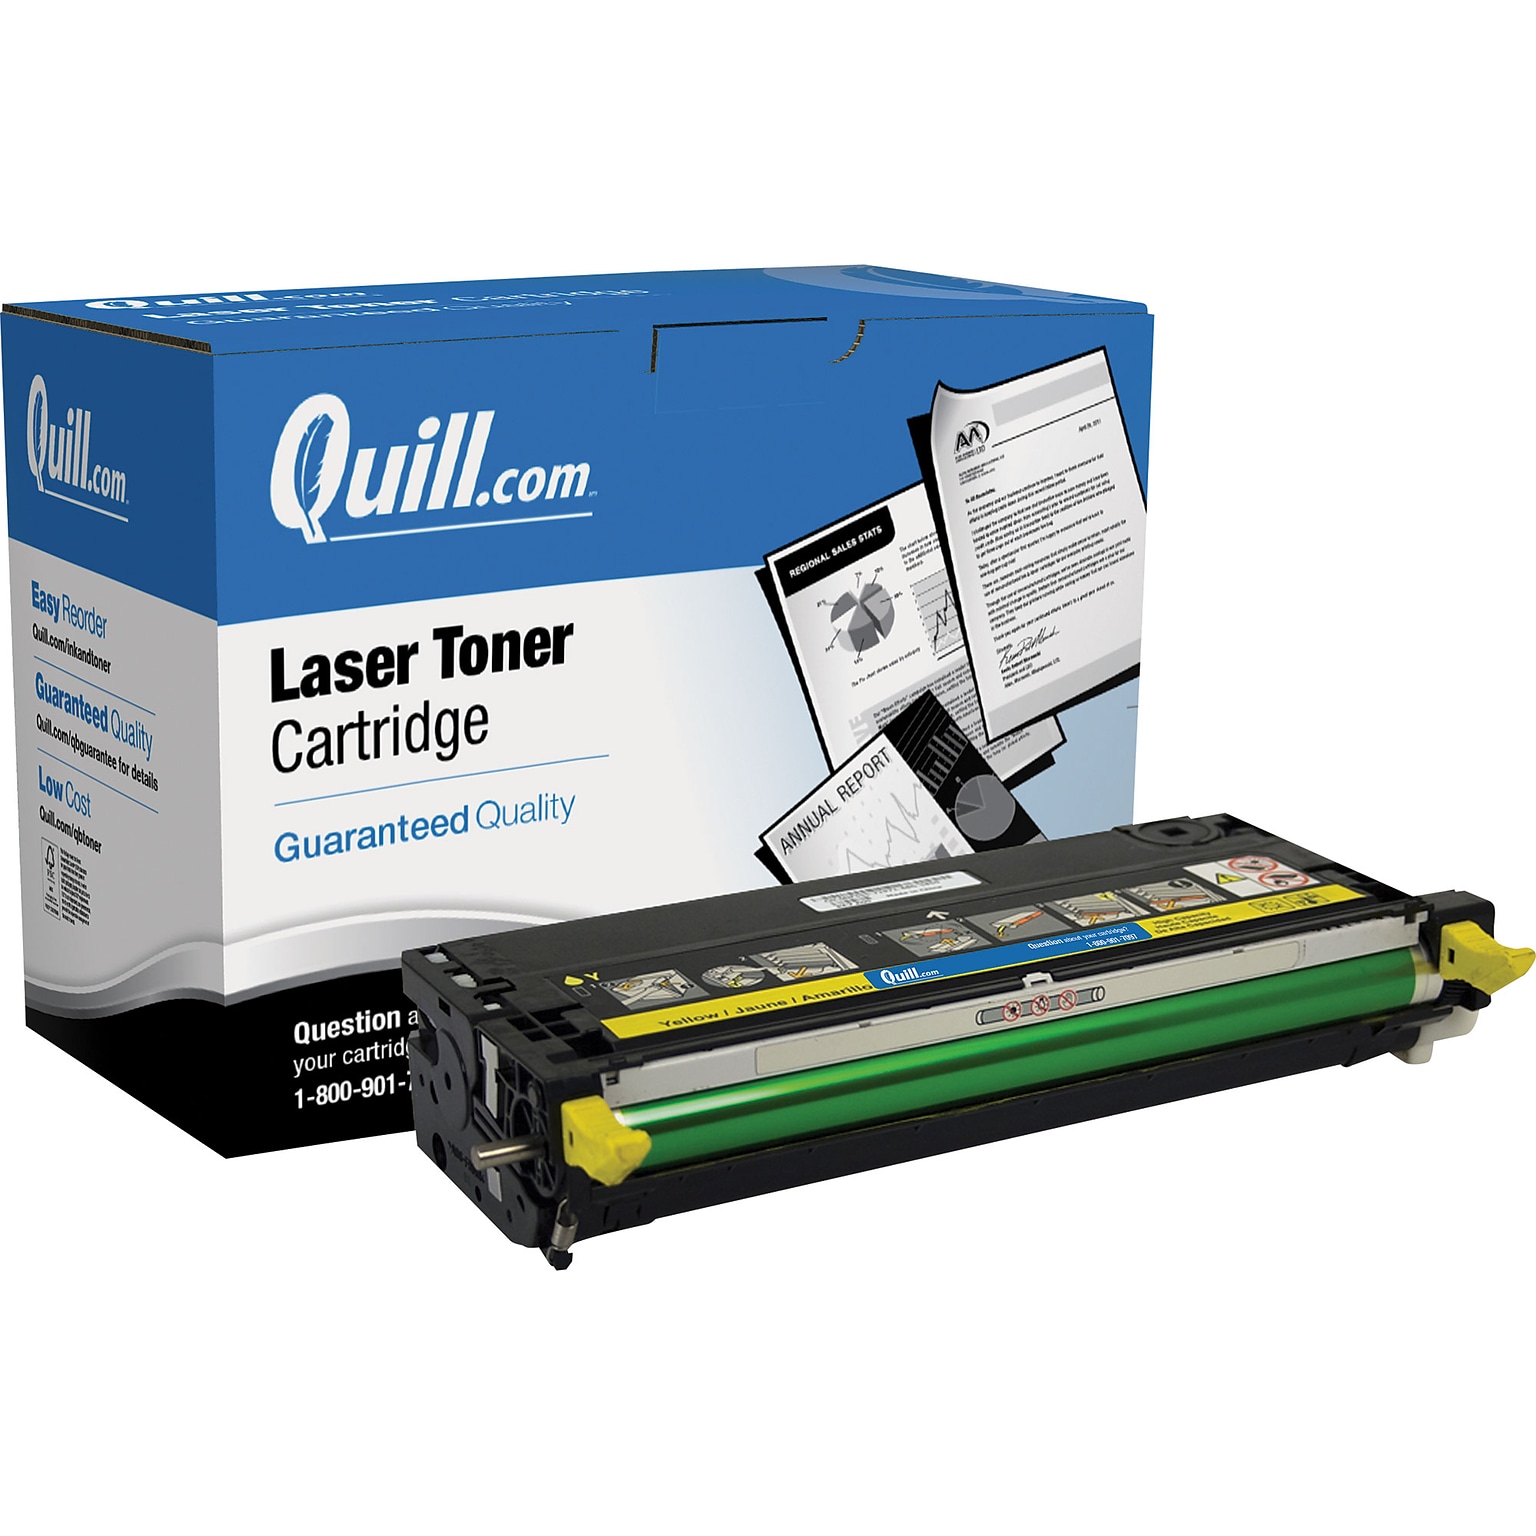 Quill Brand Remanufactured Laser Toner Cartridge for Dell™ 3110CN and 3115CN High Yield Yellow (100% Satisfaction Guaranteed)